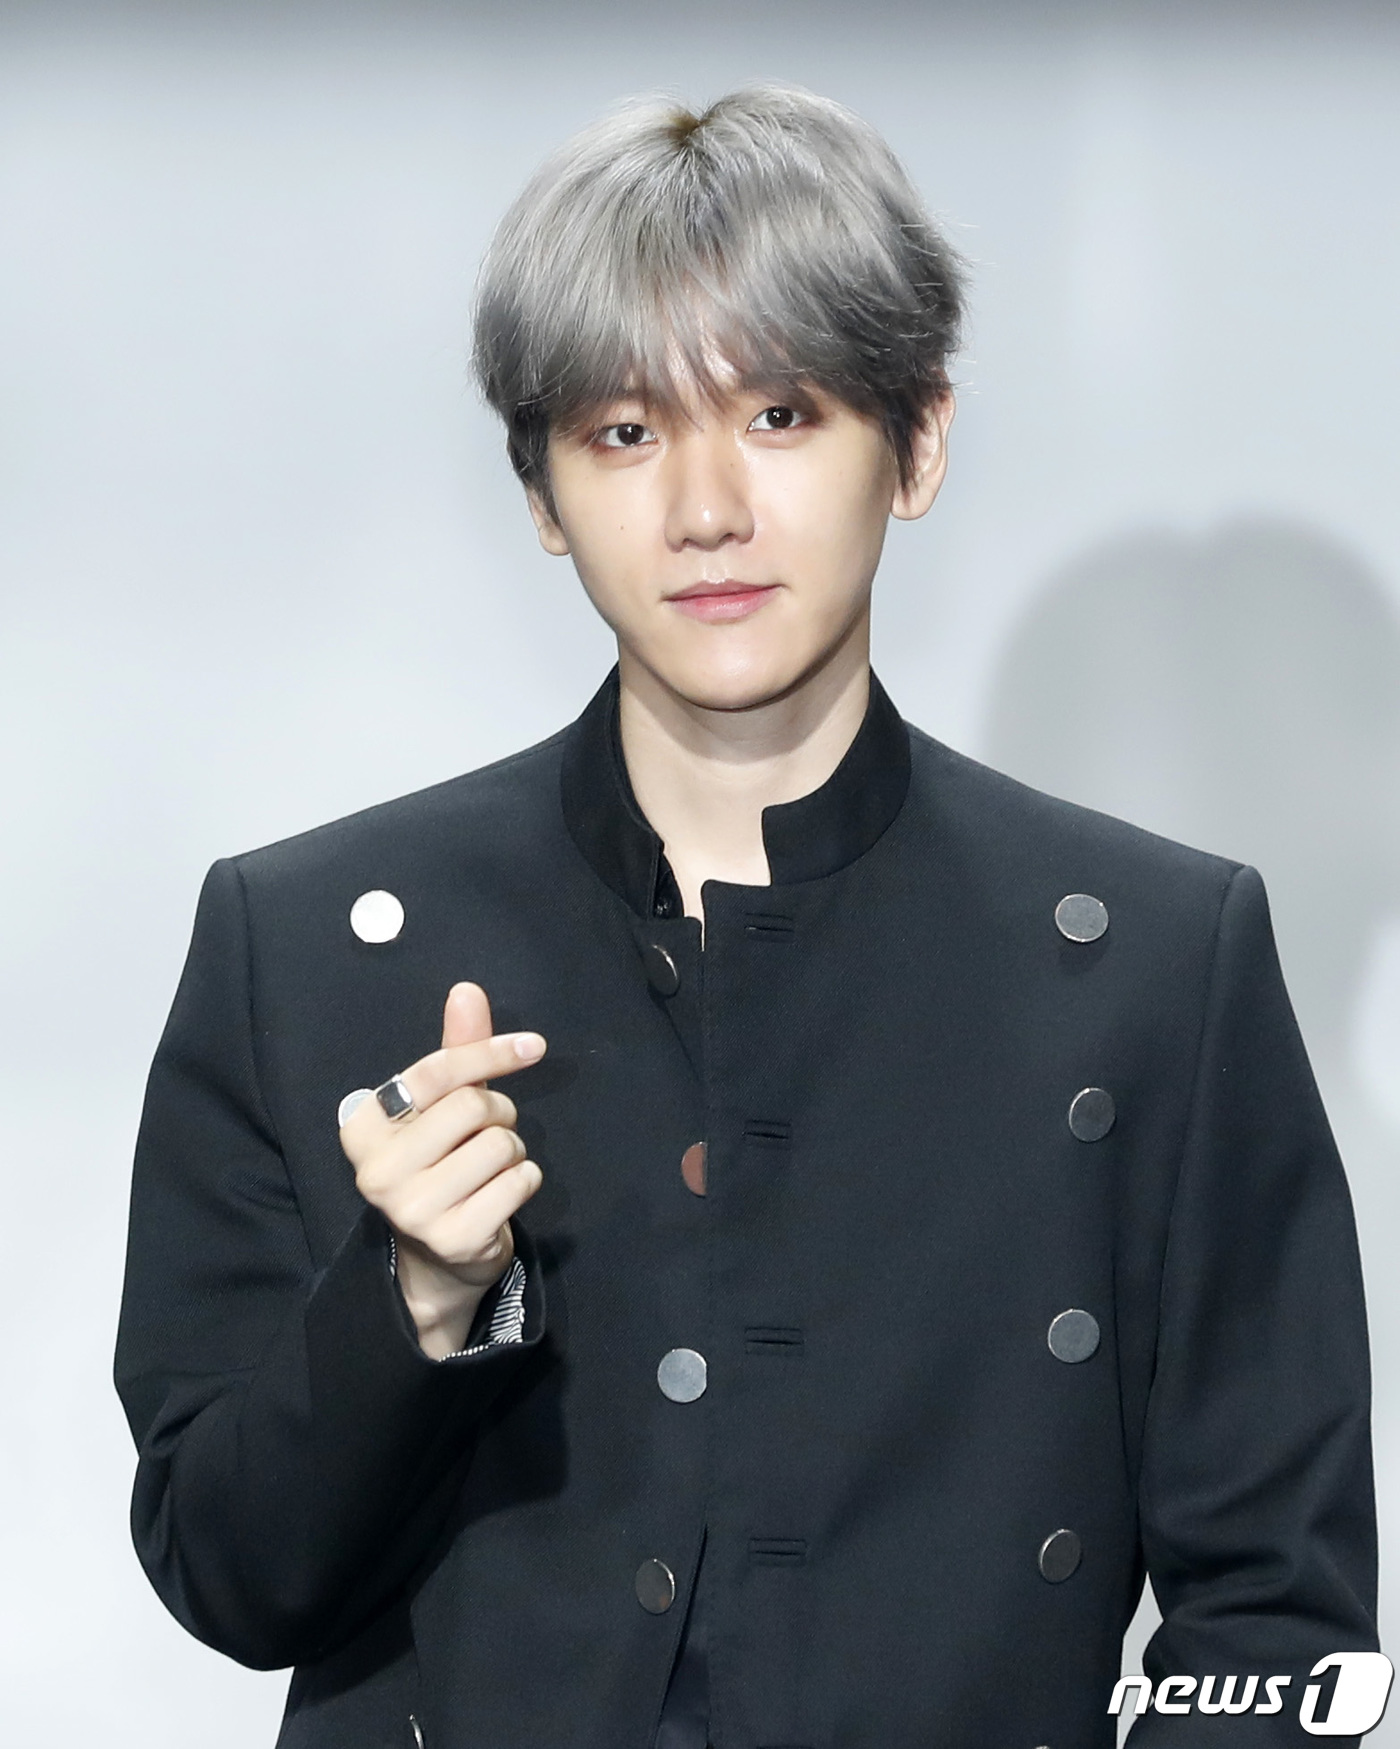 Baekhyun opened a showcase to commemorate the release of his first solo album City Lights at SAC Art Hall in Samsungro, Seoul on October 10 at 2 pm.I have been active in EXO and EXO Chenbak City for a while, but when I was a soloist, I was not burdened at first, said Baekhyun. I did not have a member to support and I had to make the stage alone.I am excited and excited about what it will be like to be released, he added. I thought I wanted to show it quickly.I have a total of six songs on this album, and my superpower is light in EXO, Baekhyun said, laughing, I made the album name City Lights with Baekhyuns identity.Baekhyun said, I can not believe it because it is an inconceivable number, he said, I think I should open it.It is an album that fans really waited for, he added. It is a song that I prepared hard because I thought about it as long as I waited.The title song UN Village is a romantic love song of R & B genre that can feel the soft vocals of Baekhyun. The music video is produced with a sensual image that combines the trendy atmosphere of the new song and will attract the attention of global music fans.The first thing I heard when I first heard it was the name of the villa, said Baekhyun. It is a place where the villas of Hannam-dong are gathered. When the members first heard it, they misunderstood it as a song of the princely Feelings.If you look at the house, it is Feelings who want to take you from the hill behind the UN Village and show you a good scenery, he added. It was very exciting and interesting.Regarding Lee Soo-mans comment, he said, The president has not responded to the group mobile messenger because he has gags. He said, I was hard to prepare for the album.I was embarrassed because the chairman, who met me since then, asked me why I did not reply, he said. But he liked me to listen to my song every day.If EXO appeals to sexy through intense performance, my solo album seems to appeal to sexy with my voice, Baekhyun said of the difference between EXO and solo album.Also on this album is R & B Stay Up, which is featured by rapper Beenzino, hip-hop R & B Betcha with a cute and confident artifact of a man who is convinced of fateful love, Ice Queen of R & B genre to win her love with cold heart with her warm heart, and R & B ballad B Ballard Ond , and a total of six songs, including a bonus track Psycho, which expresses the lost inner side among emotions that are difficult to handle.Baekhyun said, In fact, as soon as I heard this song, I thought of Beenzino a lot, he said. I did not have any personal friends, but I asked him to accept it.He also said that he did not participate in writing and composing on this album, There were many people who were better than me. I have done it once, but I have not looked back since the company.So I thought this road was not my way. I thought it was a priority to show stability as a player rather than participate in songwriting, Baekhyun added.Baekhyun will be on KBS 2TV Music Bank, Yoo Hee-yeols Sketchbook and MBC show on the 13th.Music center and SBS popular song on the 14th, and present the title song UN Village stage.